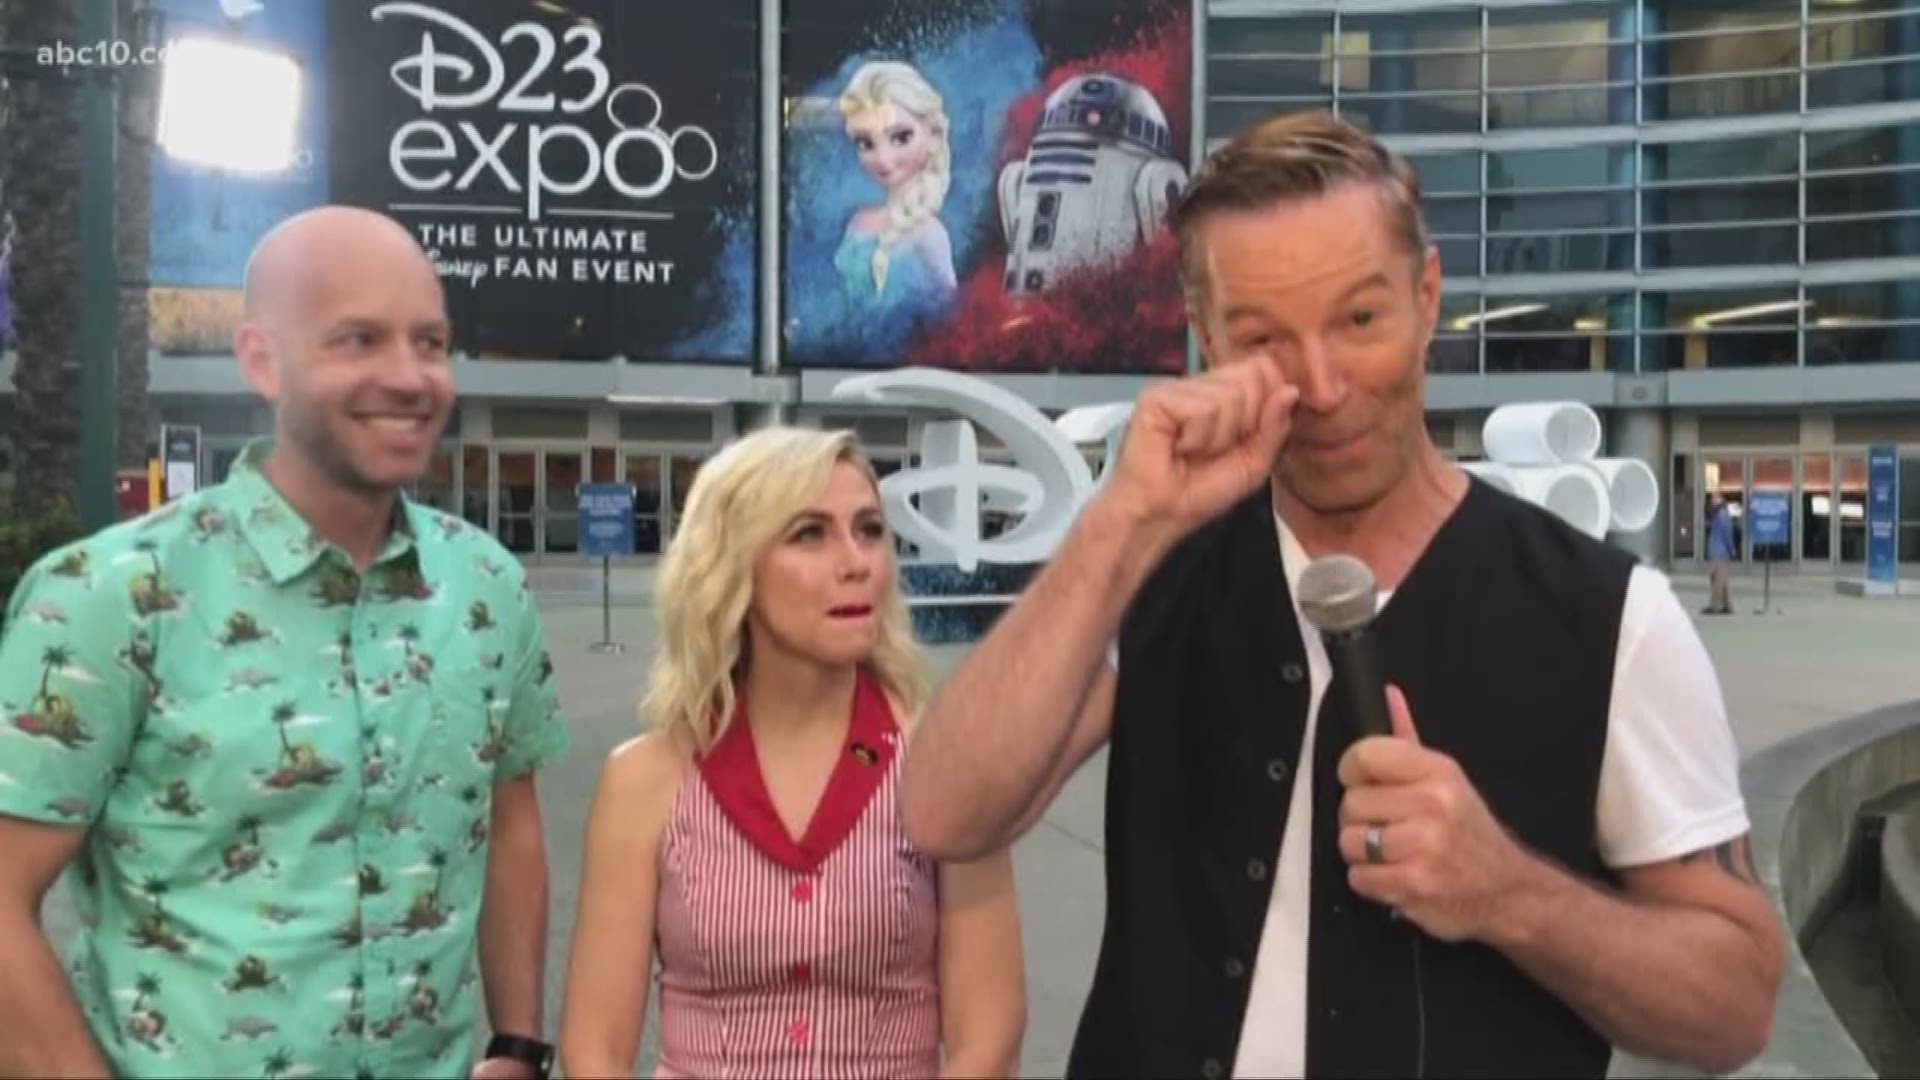 Mark S. Allen meets up with Bret Iwan, the voice of Mickey Mouse, and Ashley Eckstein, who voices the Star Wars character Ahsoka Tano at the D23 Expo.